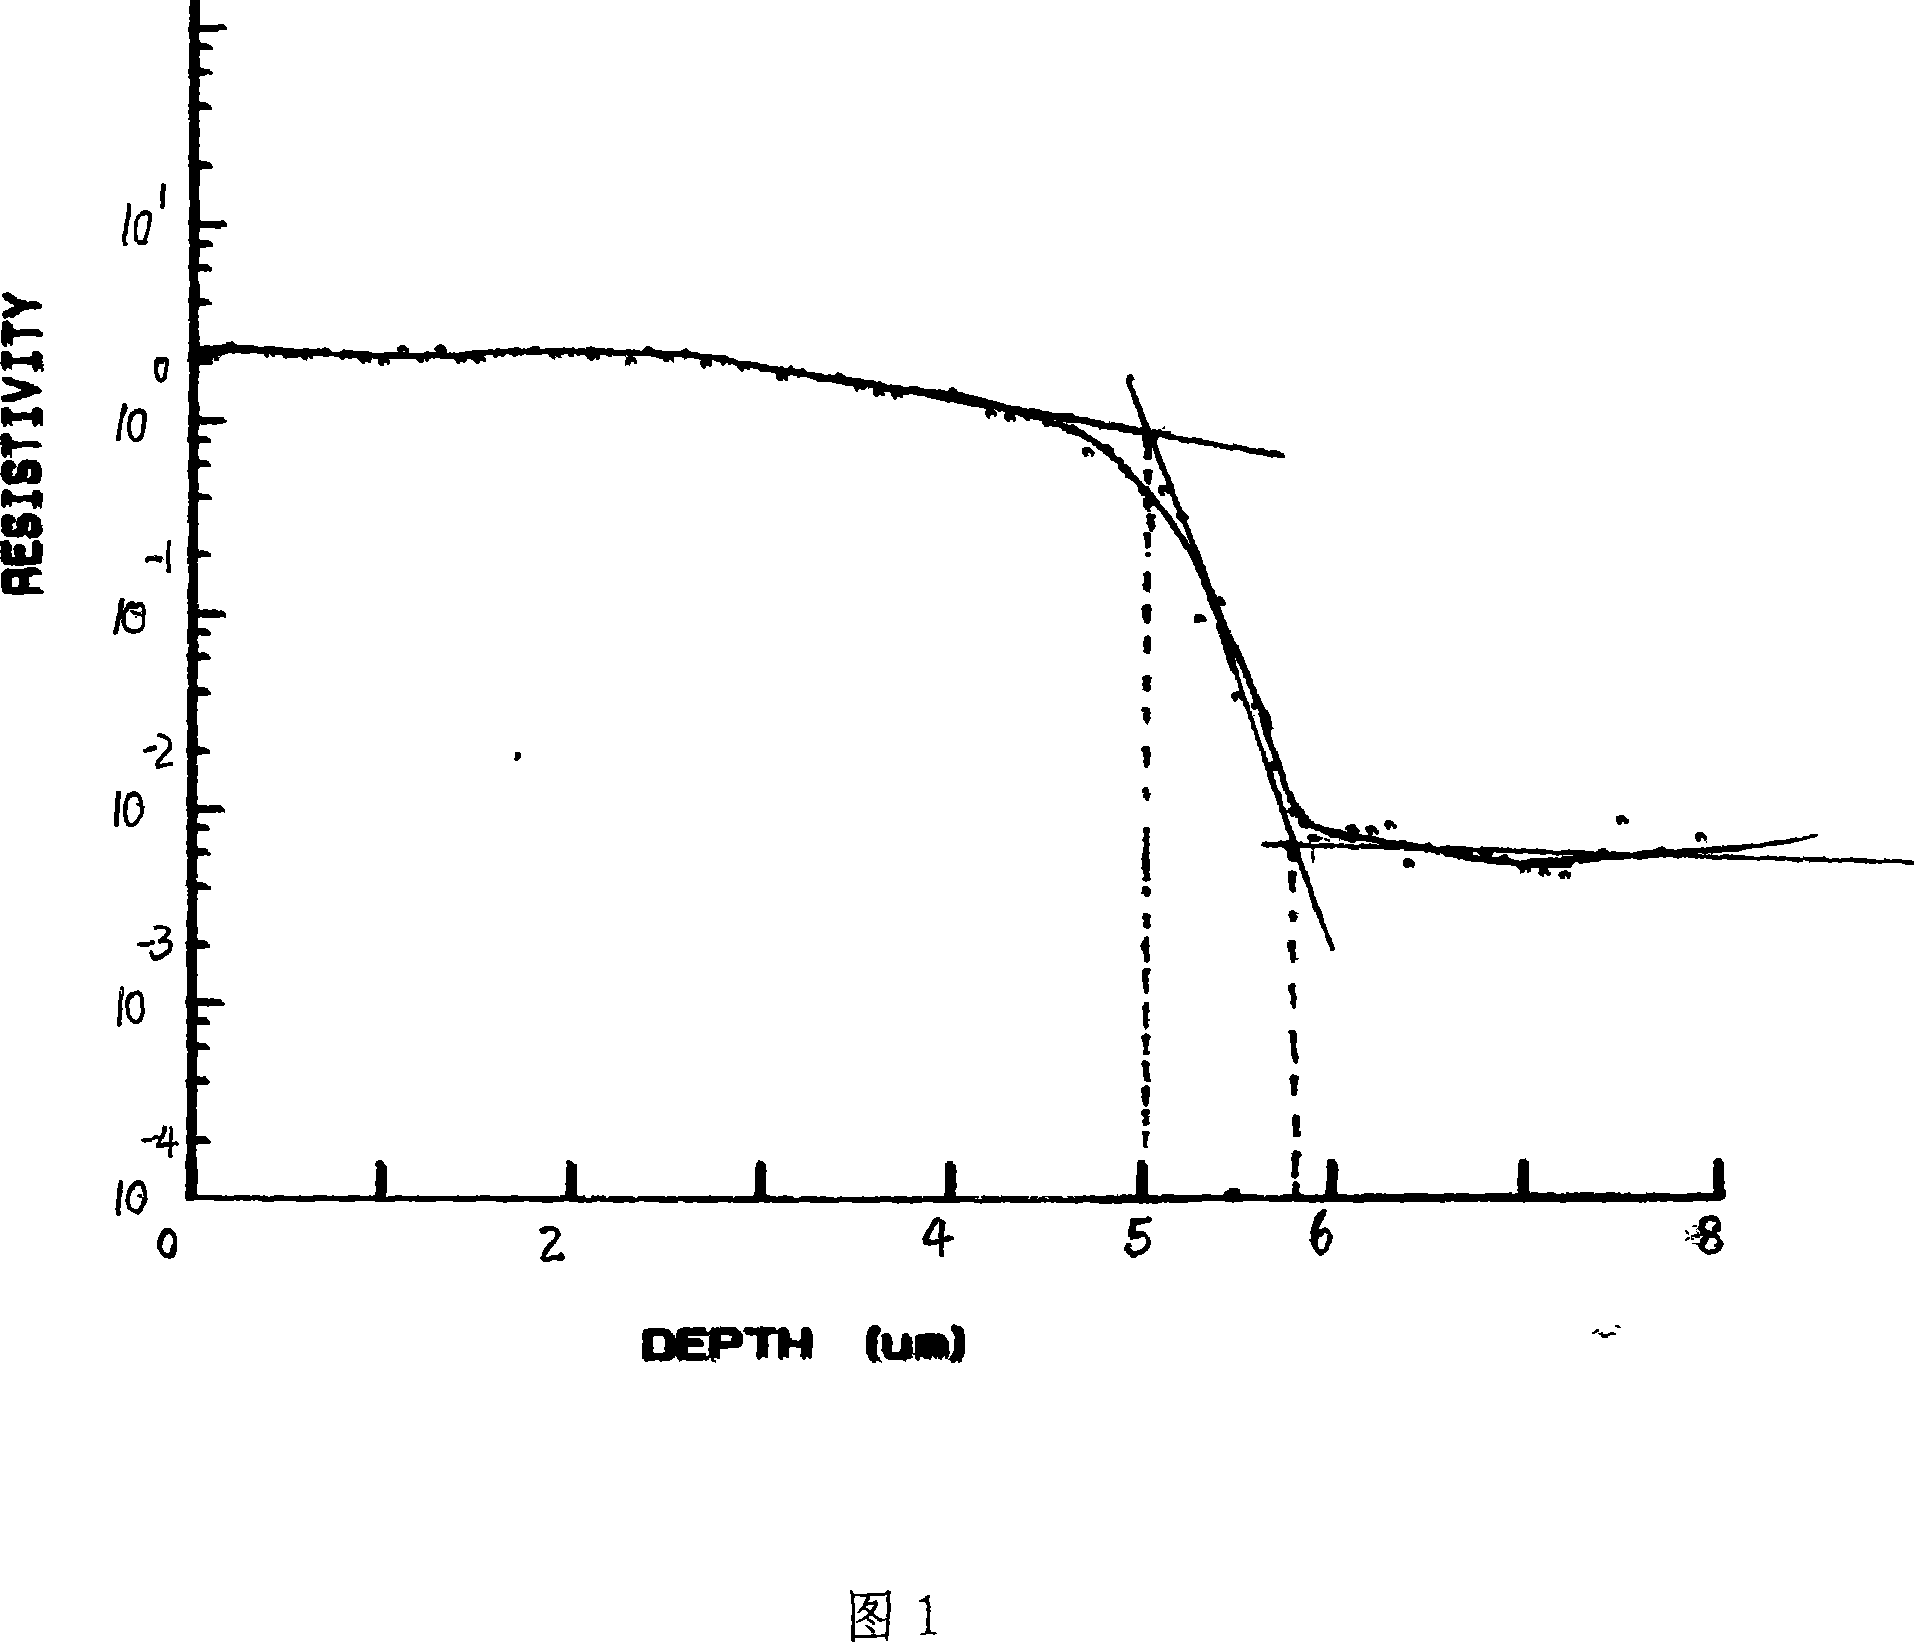 Control method for epitaxial layer transition zone on re-mixed arsenic underlay